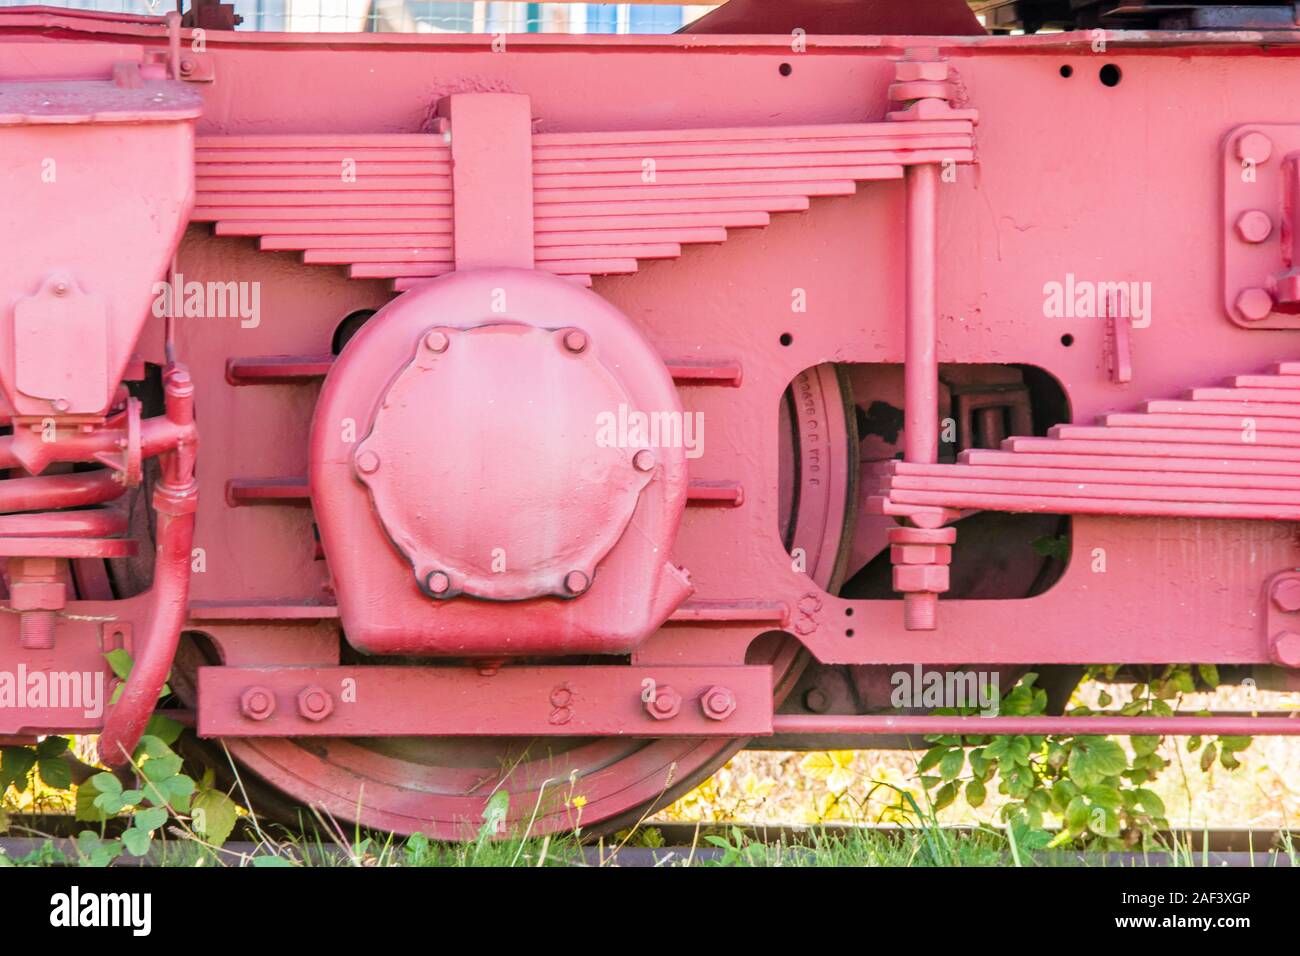 Wheel of a railway wagon with suspension Stock Photo